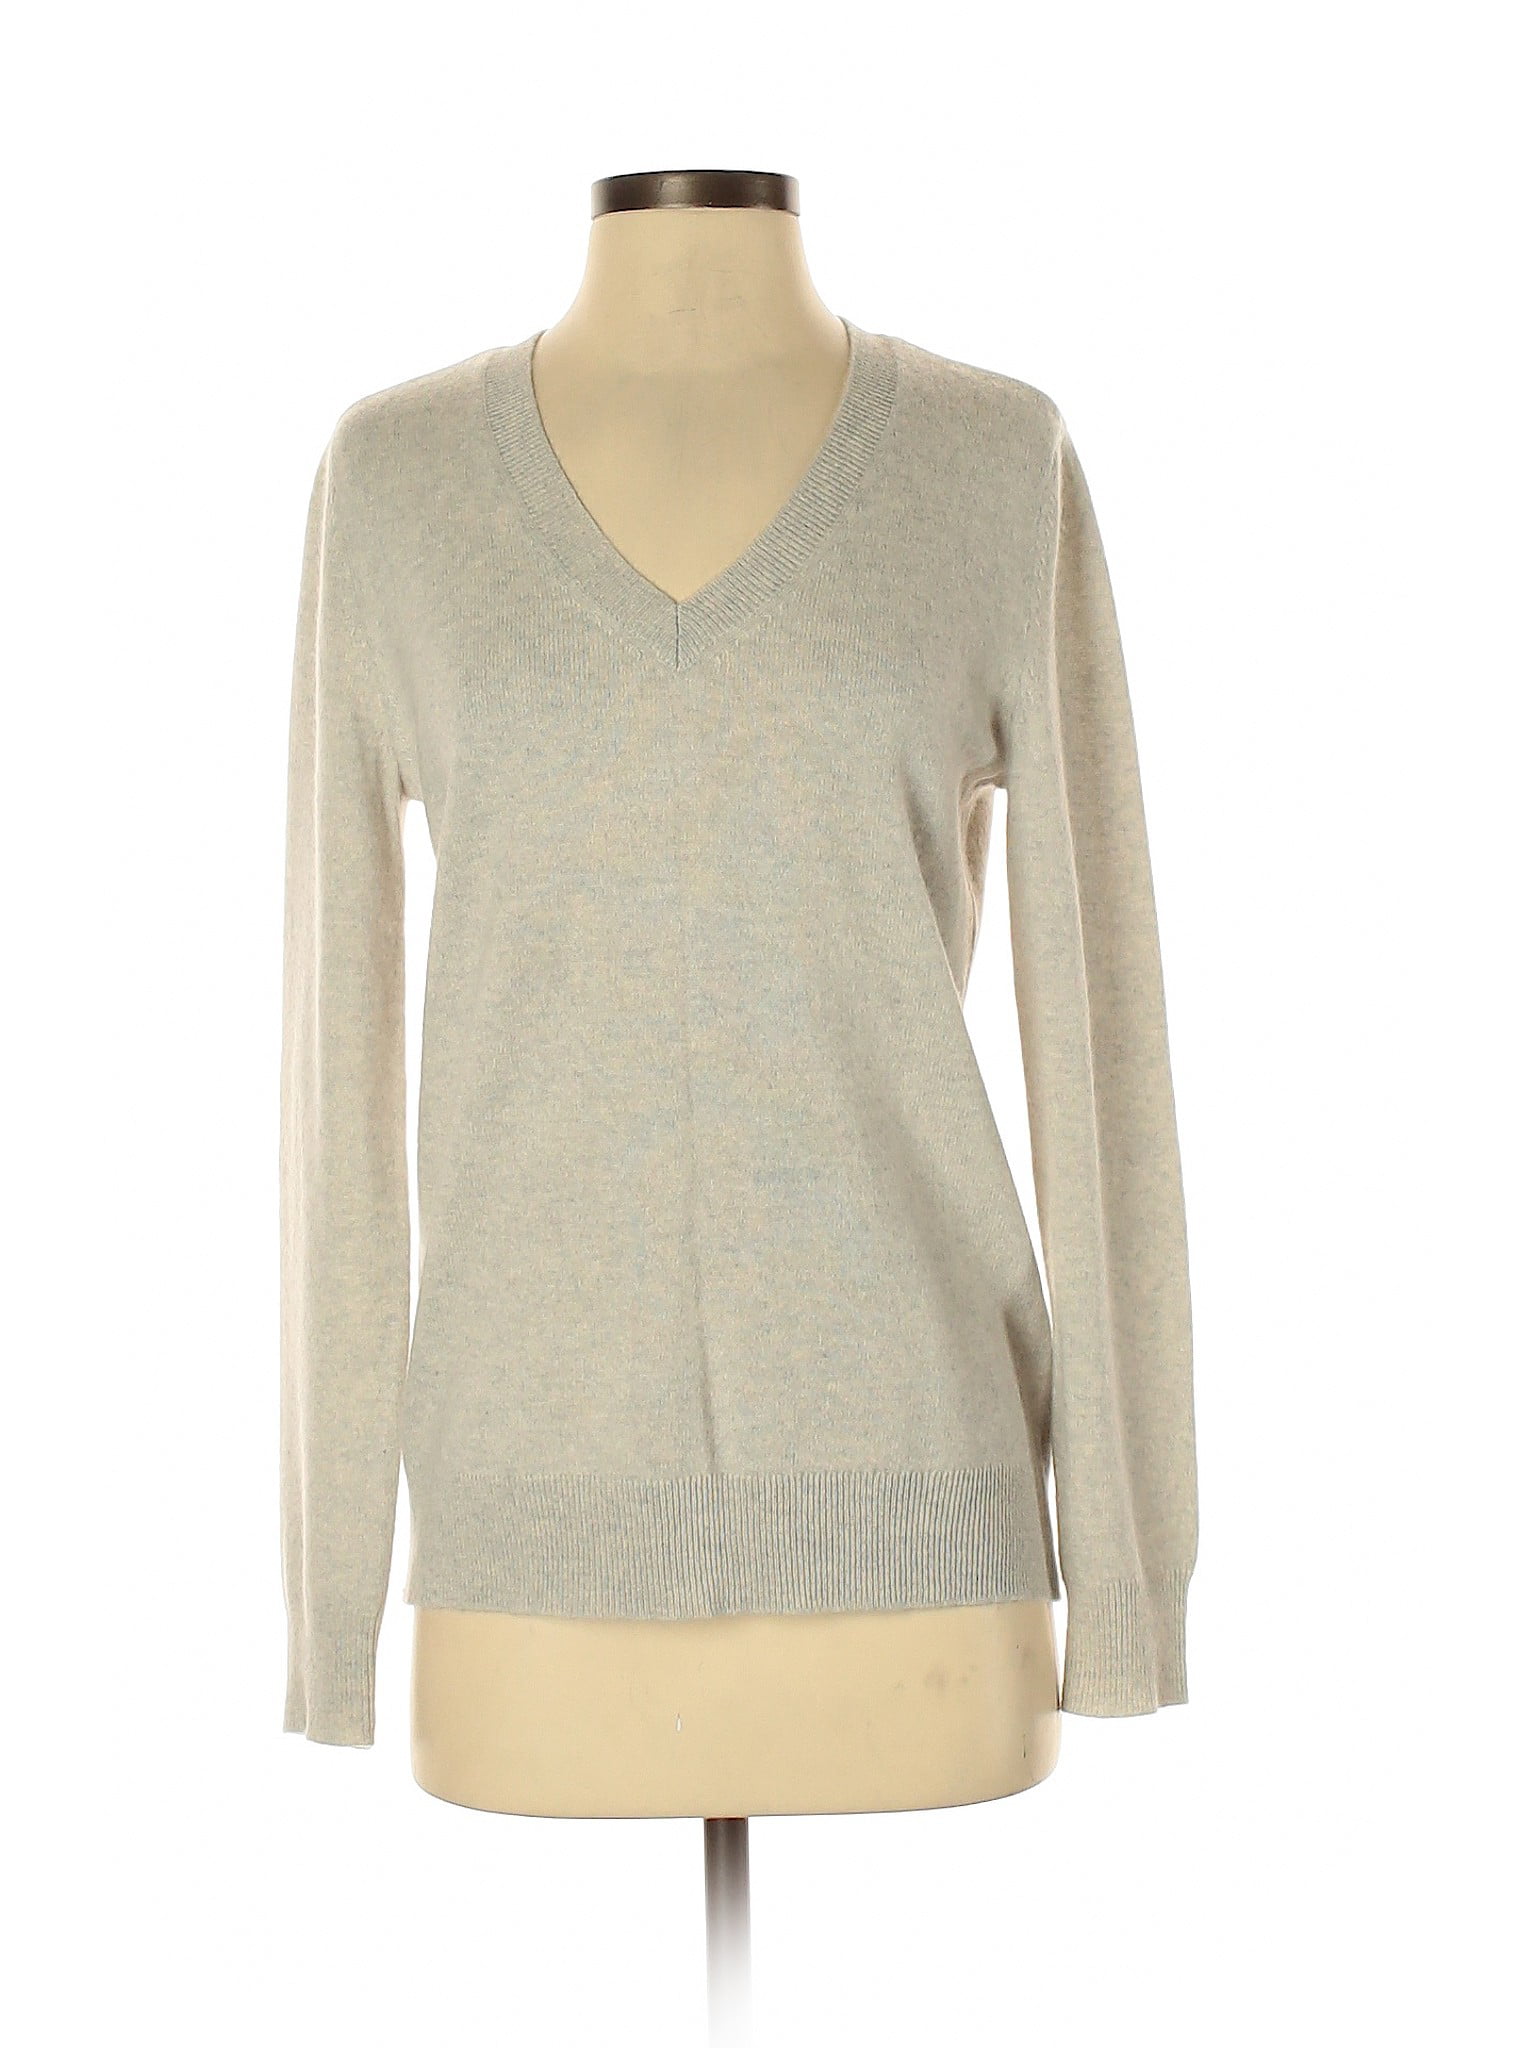 Lord & Taylor - Pre-Owned Lord & Taylor Women's Size XS Cashmere ...